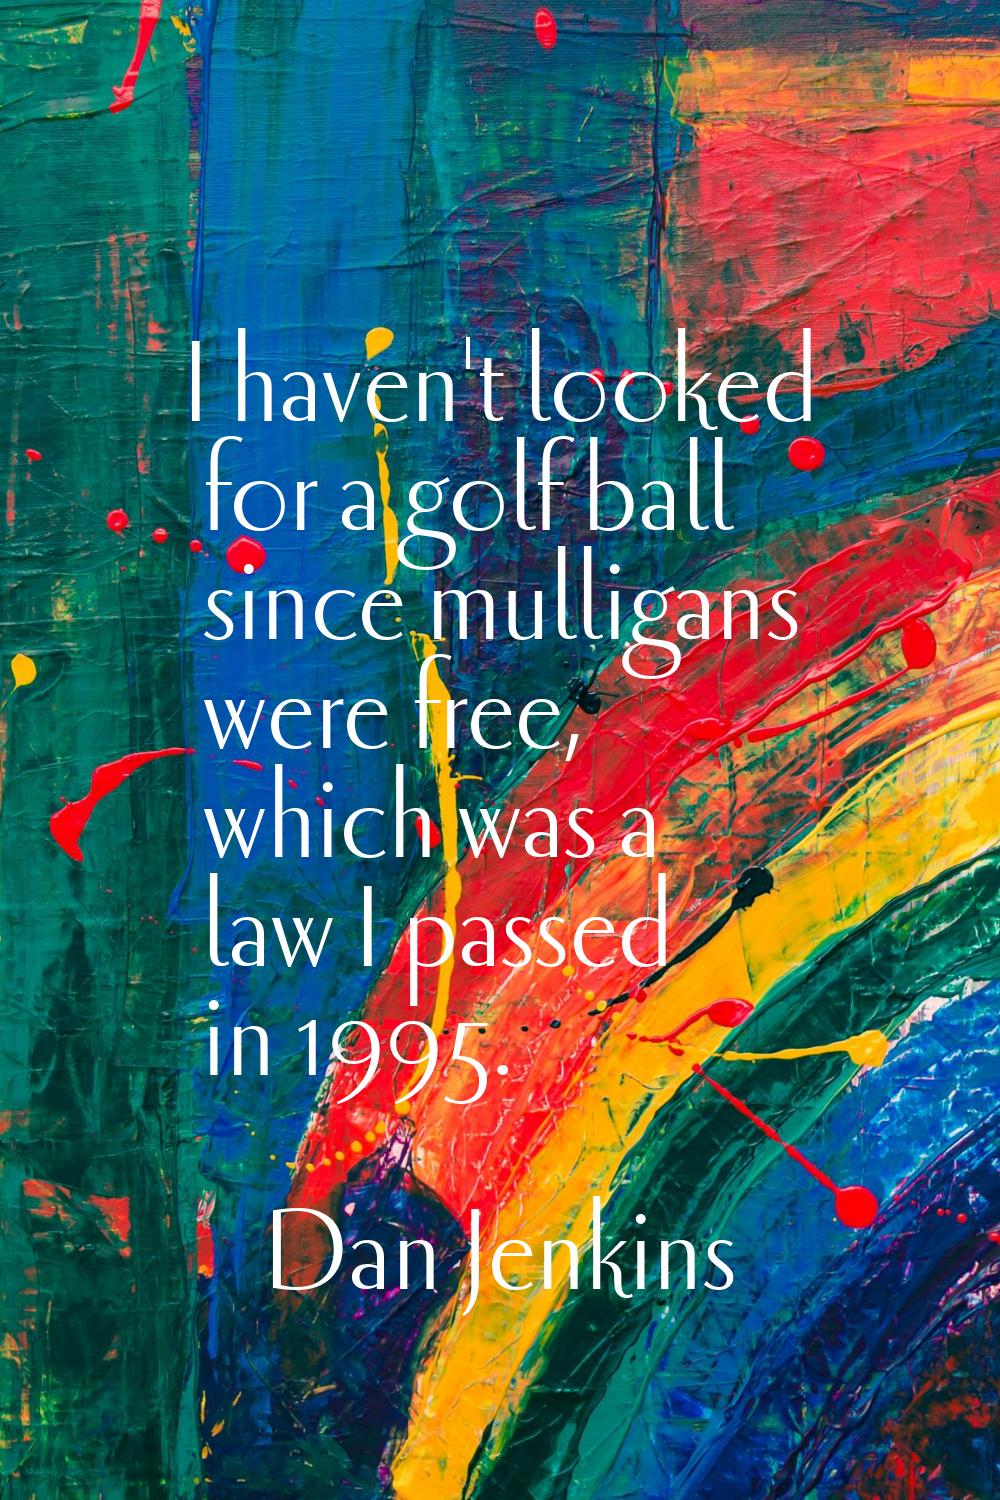 I haven't looked for a golf ball since mulligans were free, which was a law I passed in 1995.